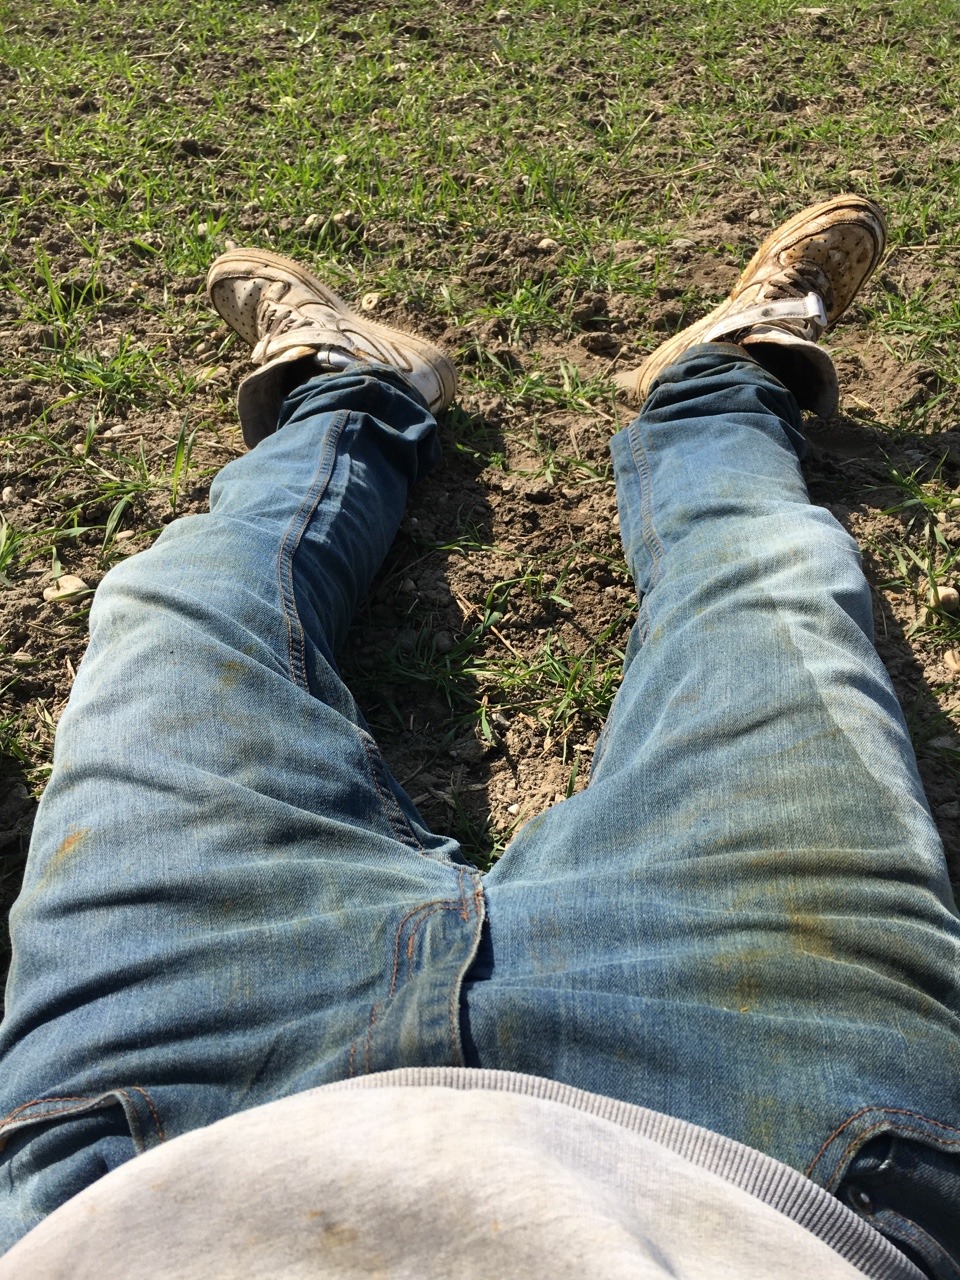 Outdoor, pissed jeans, shit and piss filled Nike AFOs II. Videos will follow ;)